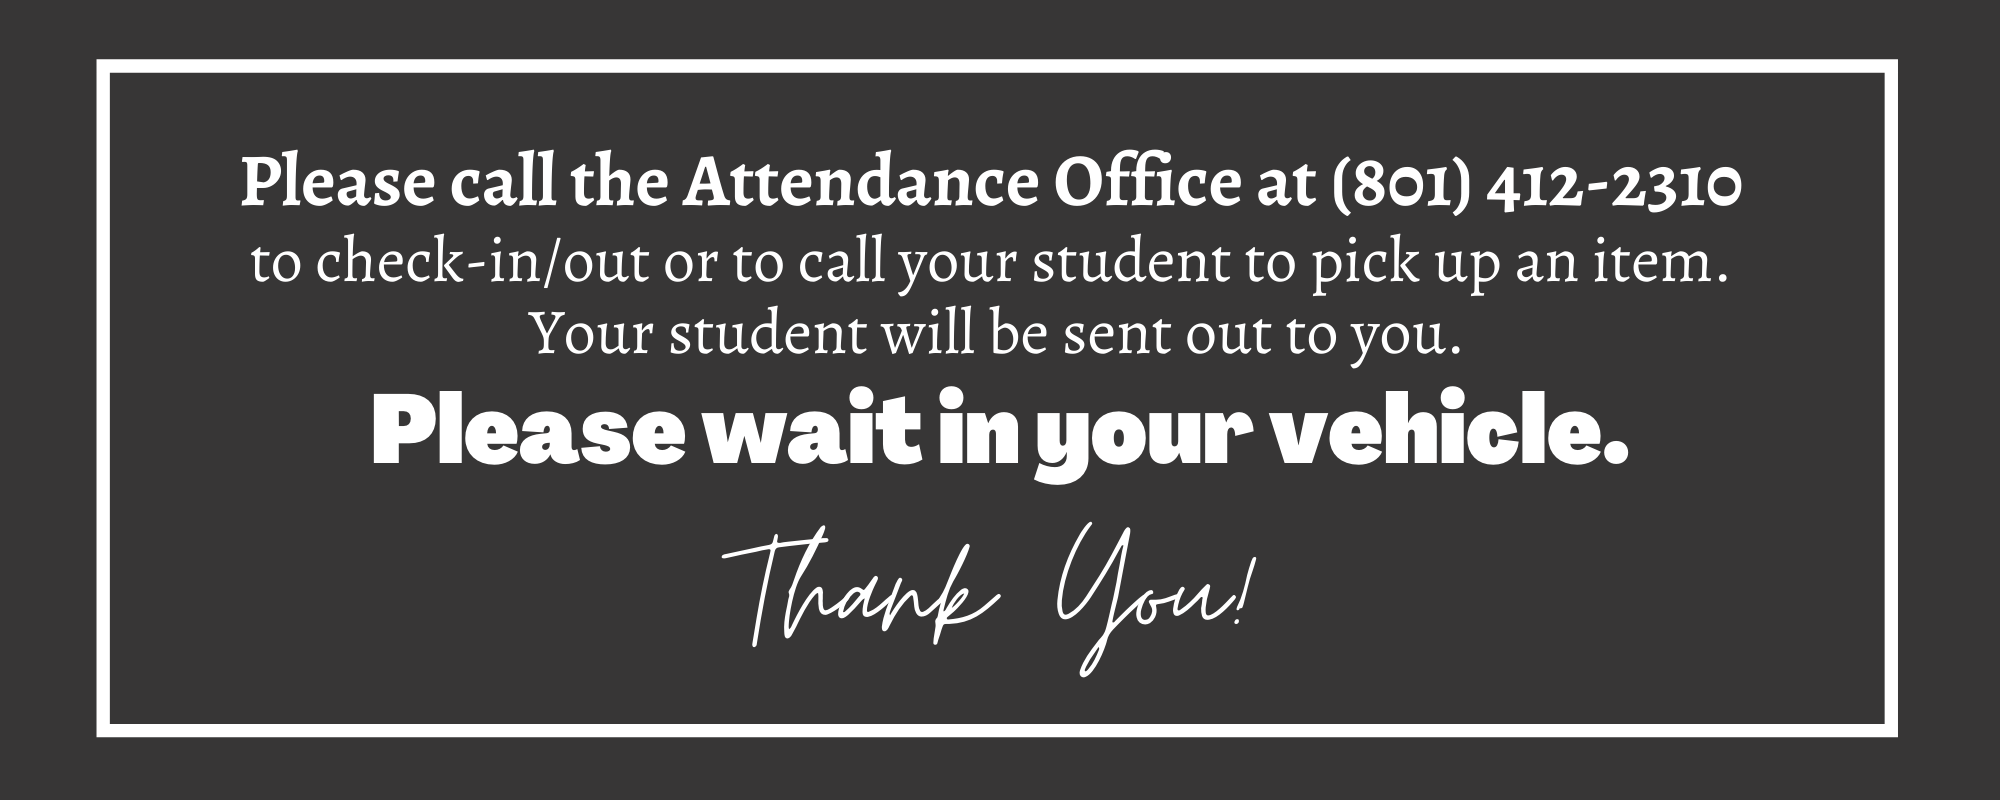 Please call the Attendance Office at (801) 412-2310 to check-in/out or to call your student to pick up an item. Your student will be sent out to you. Please wait in your vehicle. Thank you!